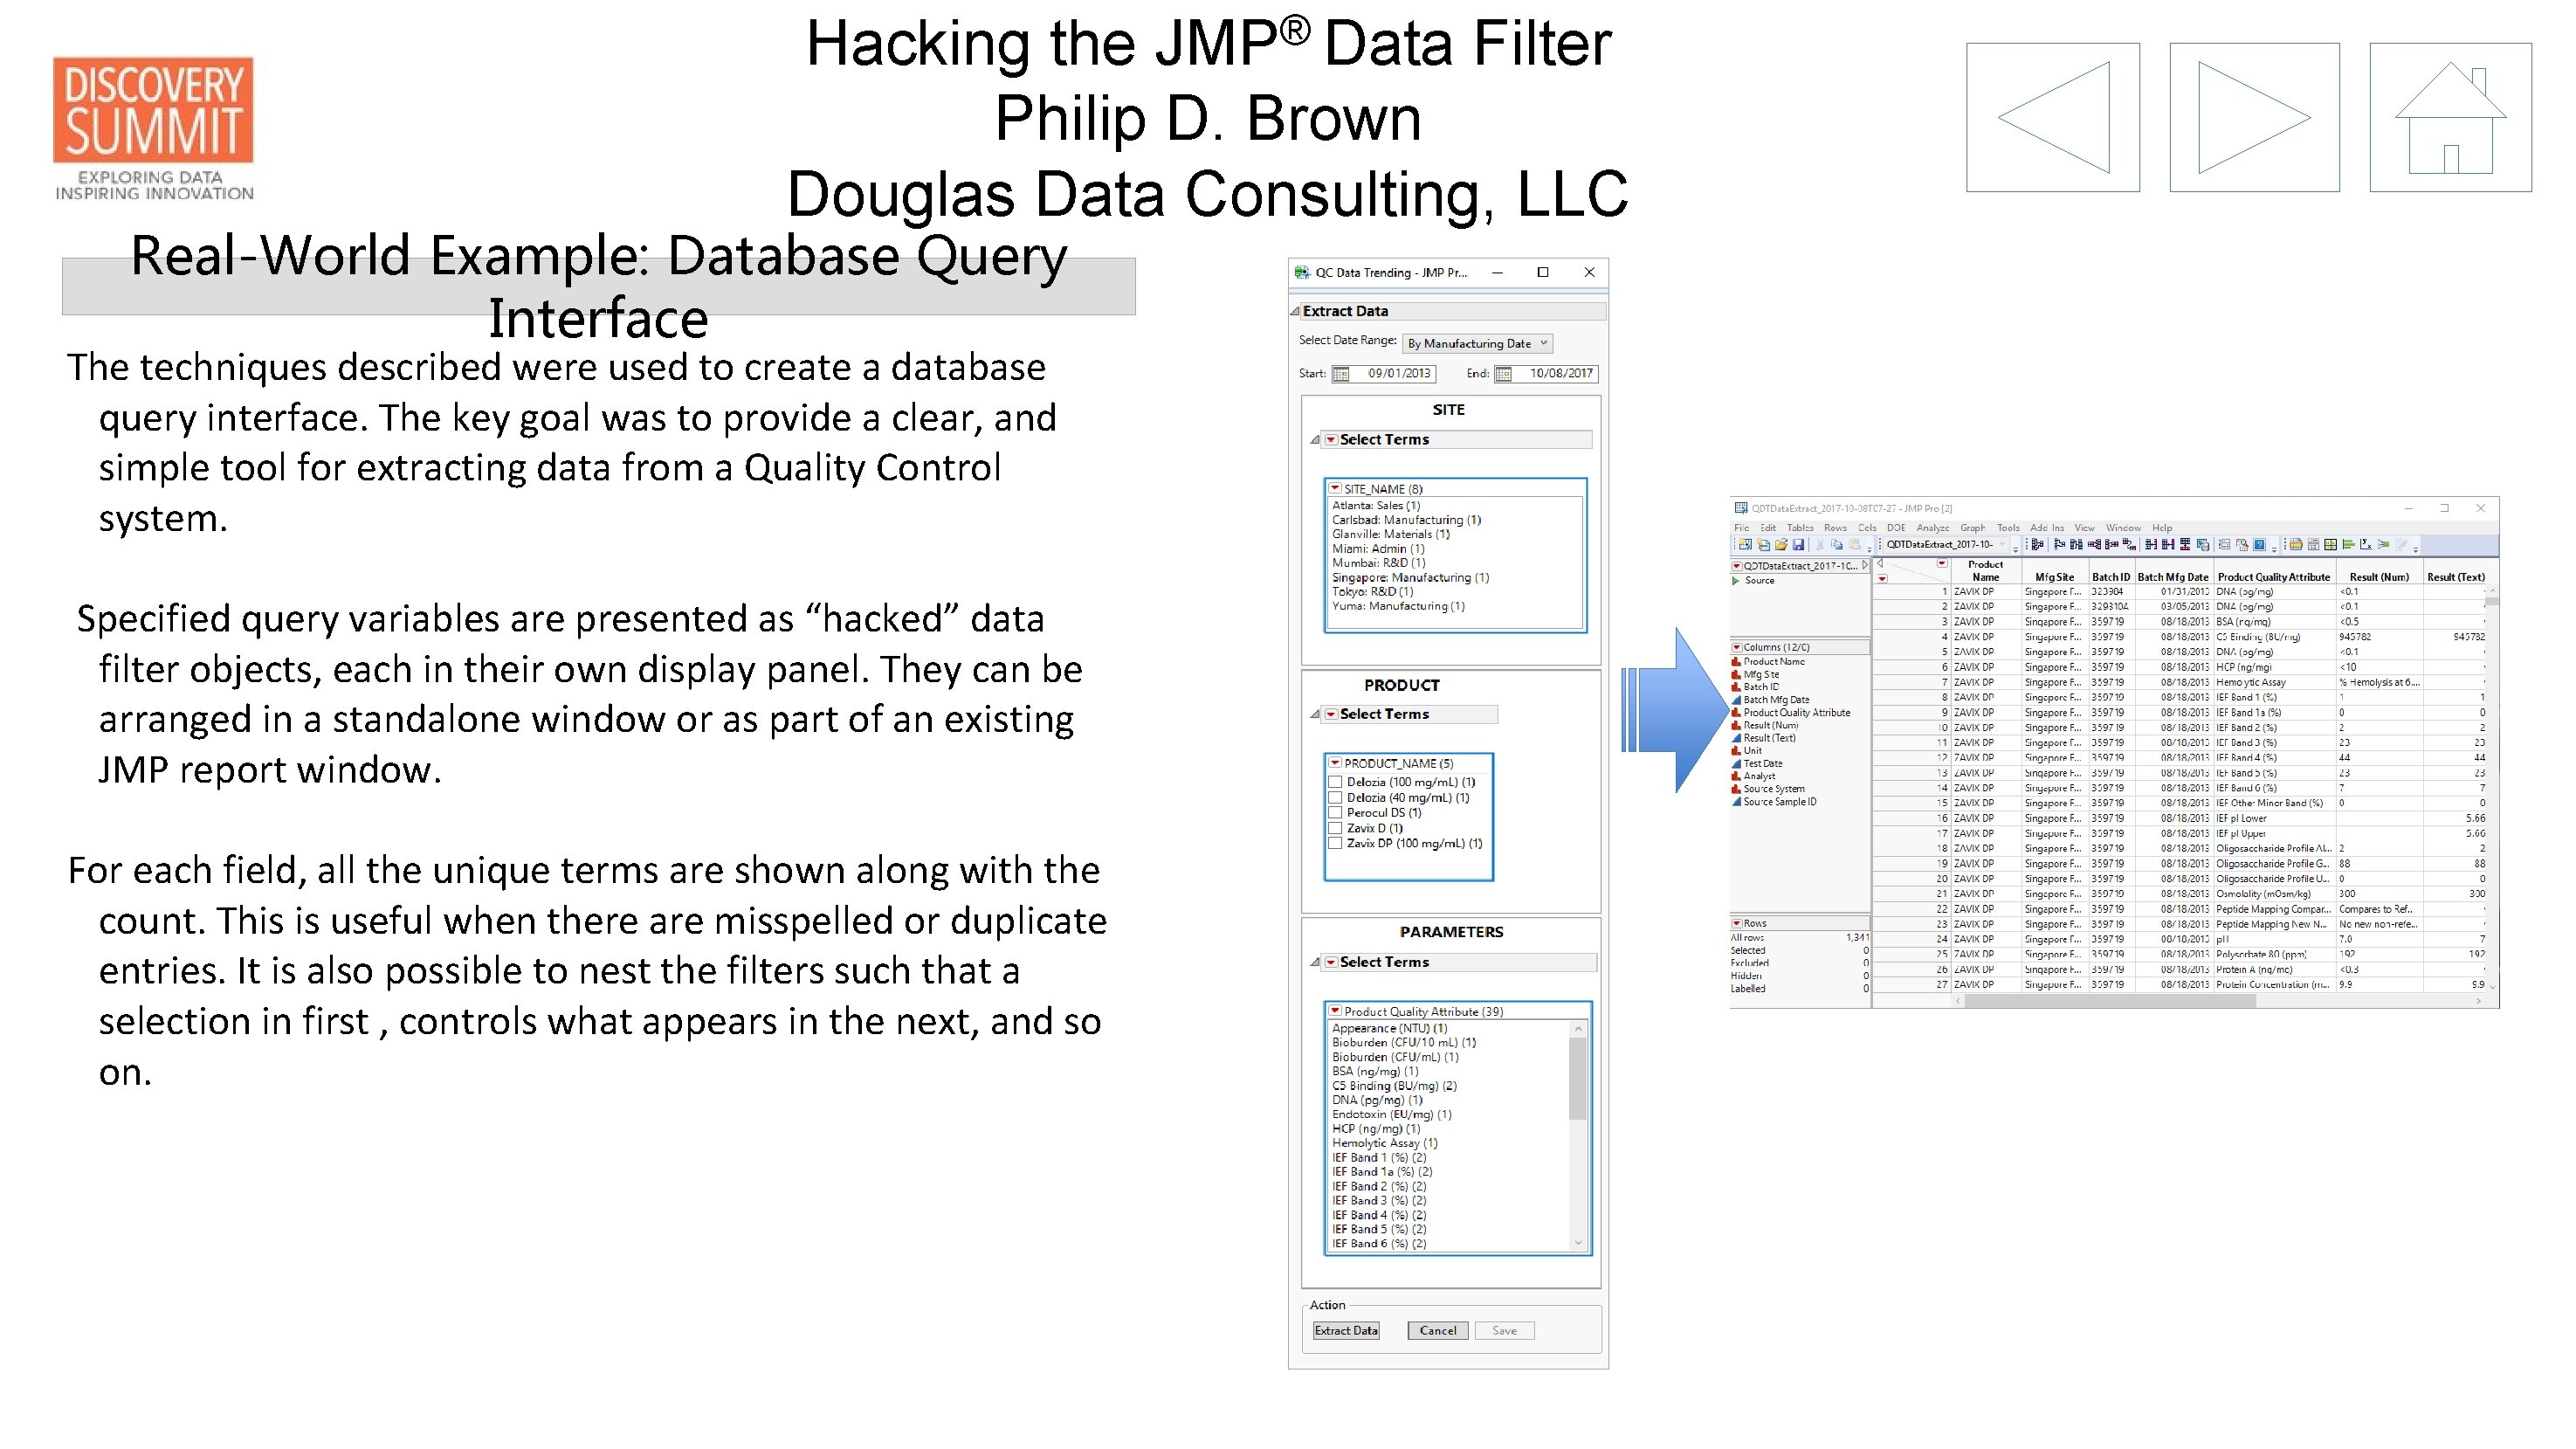 ® JMP Data Hacking the Filter Philip D. Brown Douglas Data Consulting, LLC Real-World